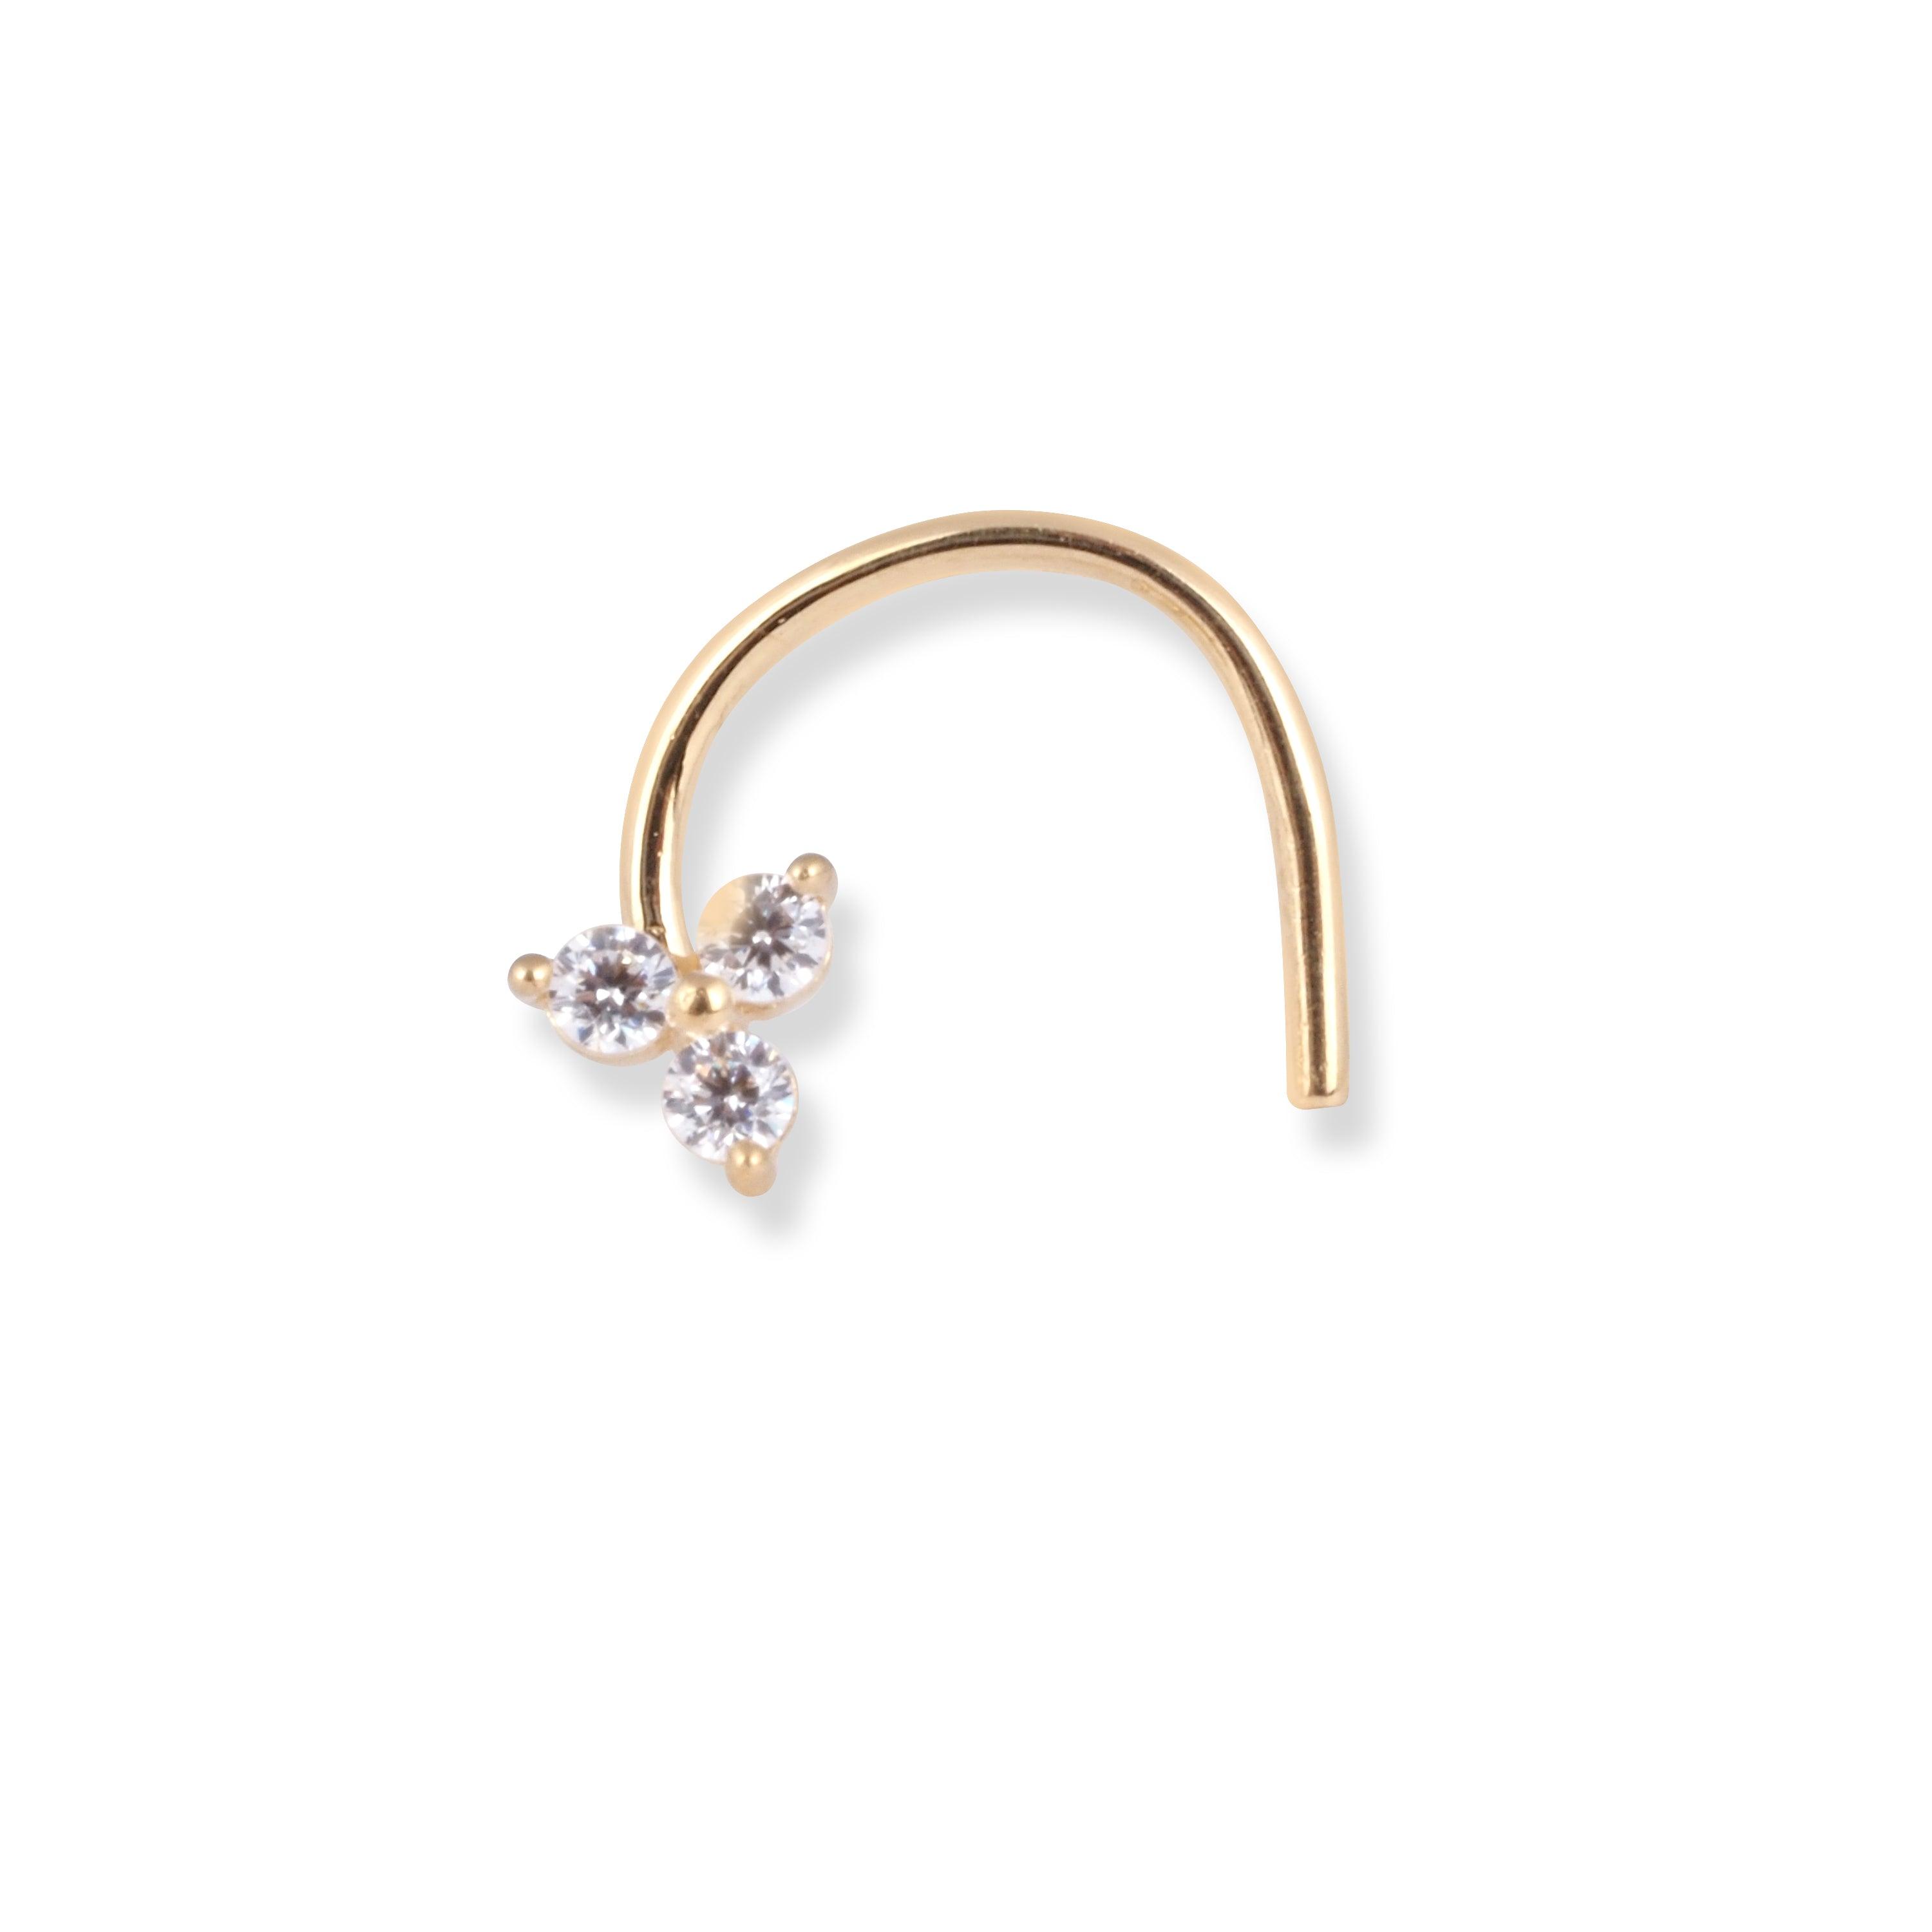 18ct Yellow Gold Flower Design Wire Back Nose Stud with 3 White Cubic Zirconia Stones NS-7574 - Minar Jewellers